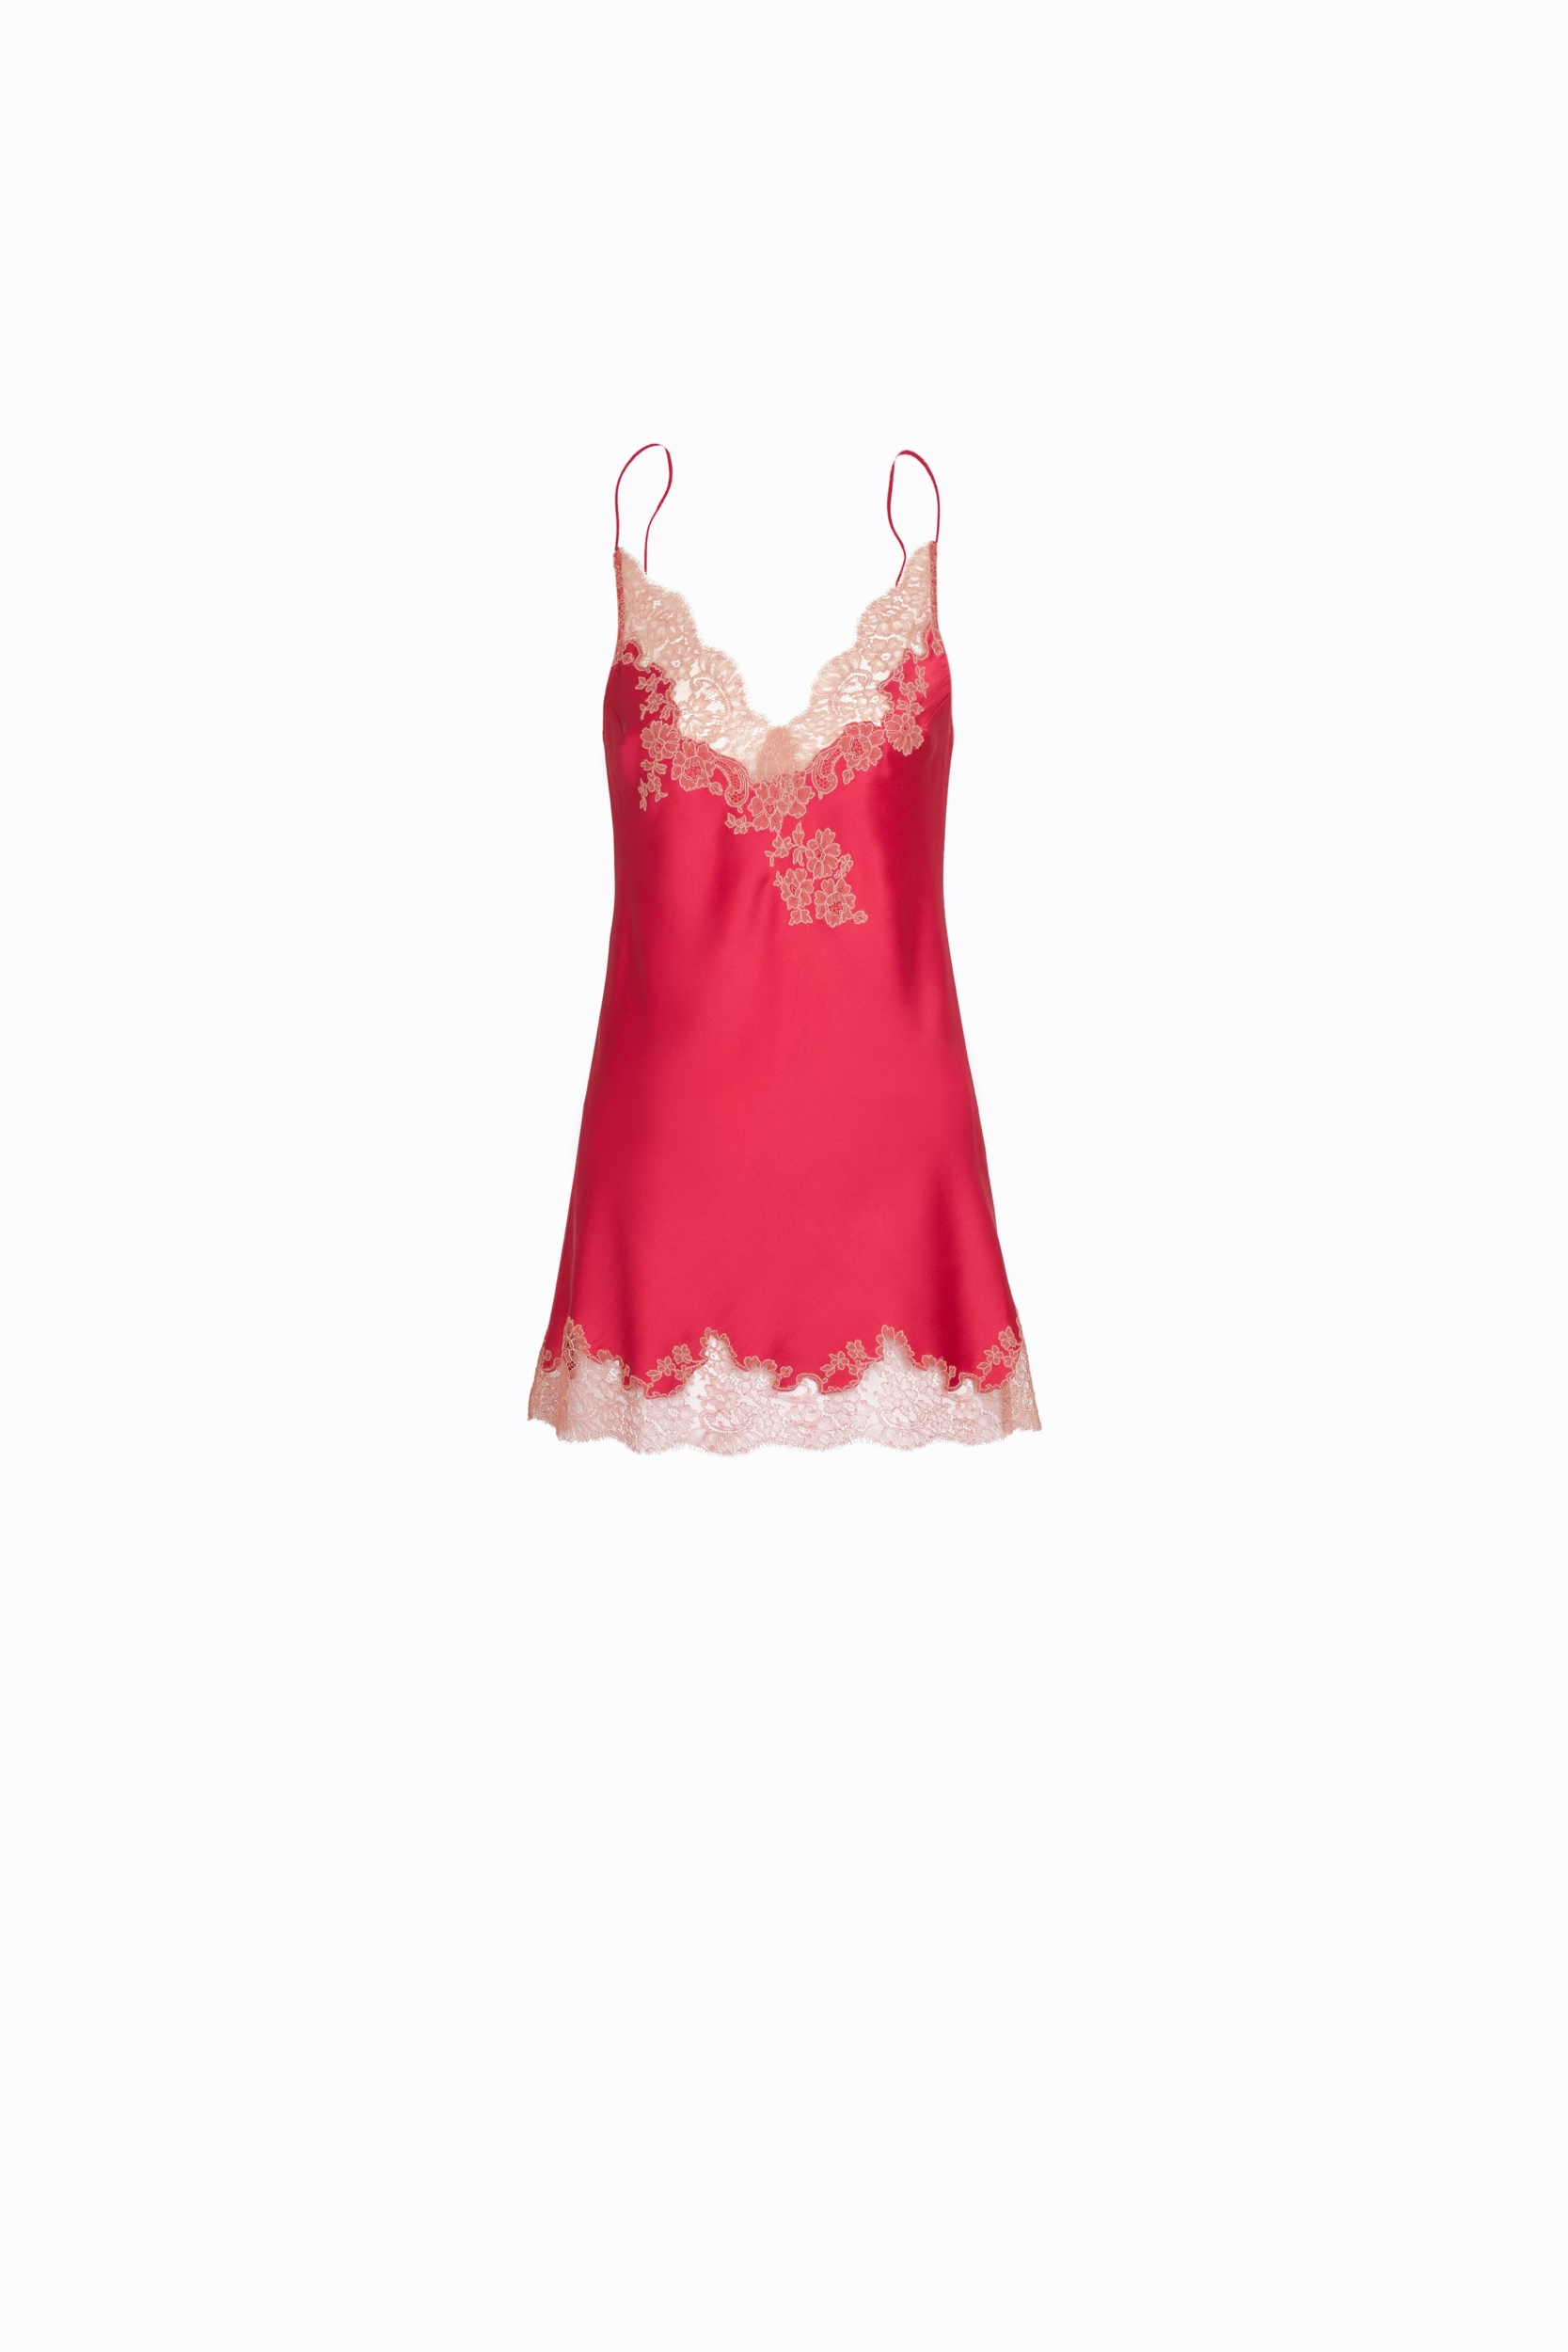 Carine Gilson Silk Satin-Trimmed Lace Soft-Cup Bra, 32 Sexy Pink Lingerie  Pieces You'll Want to Wear Beyond Valentine's Day